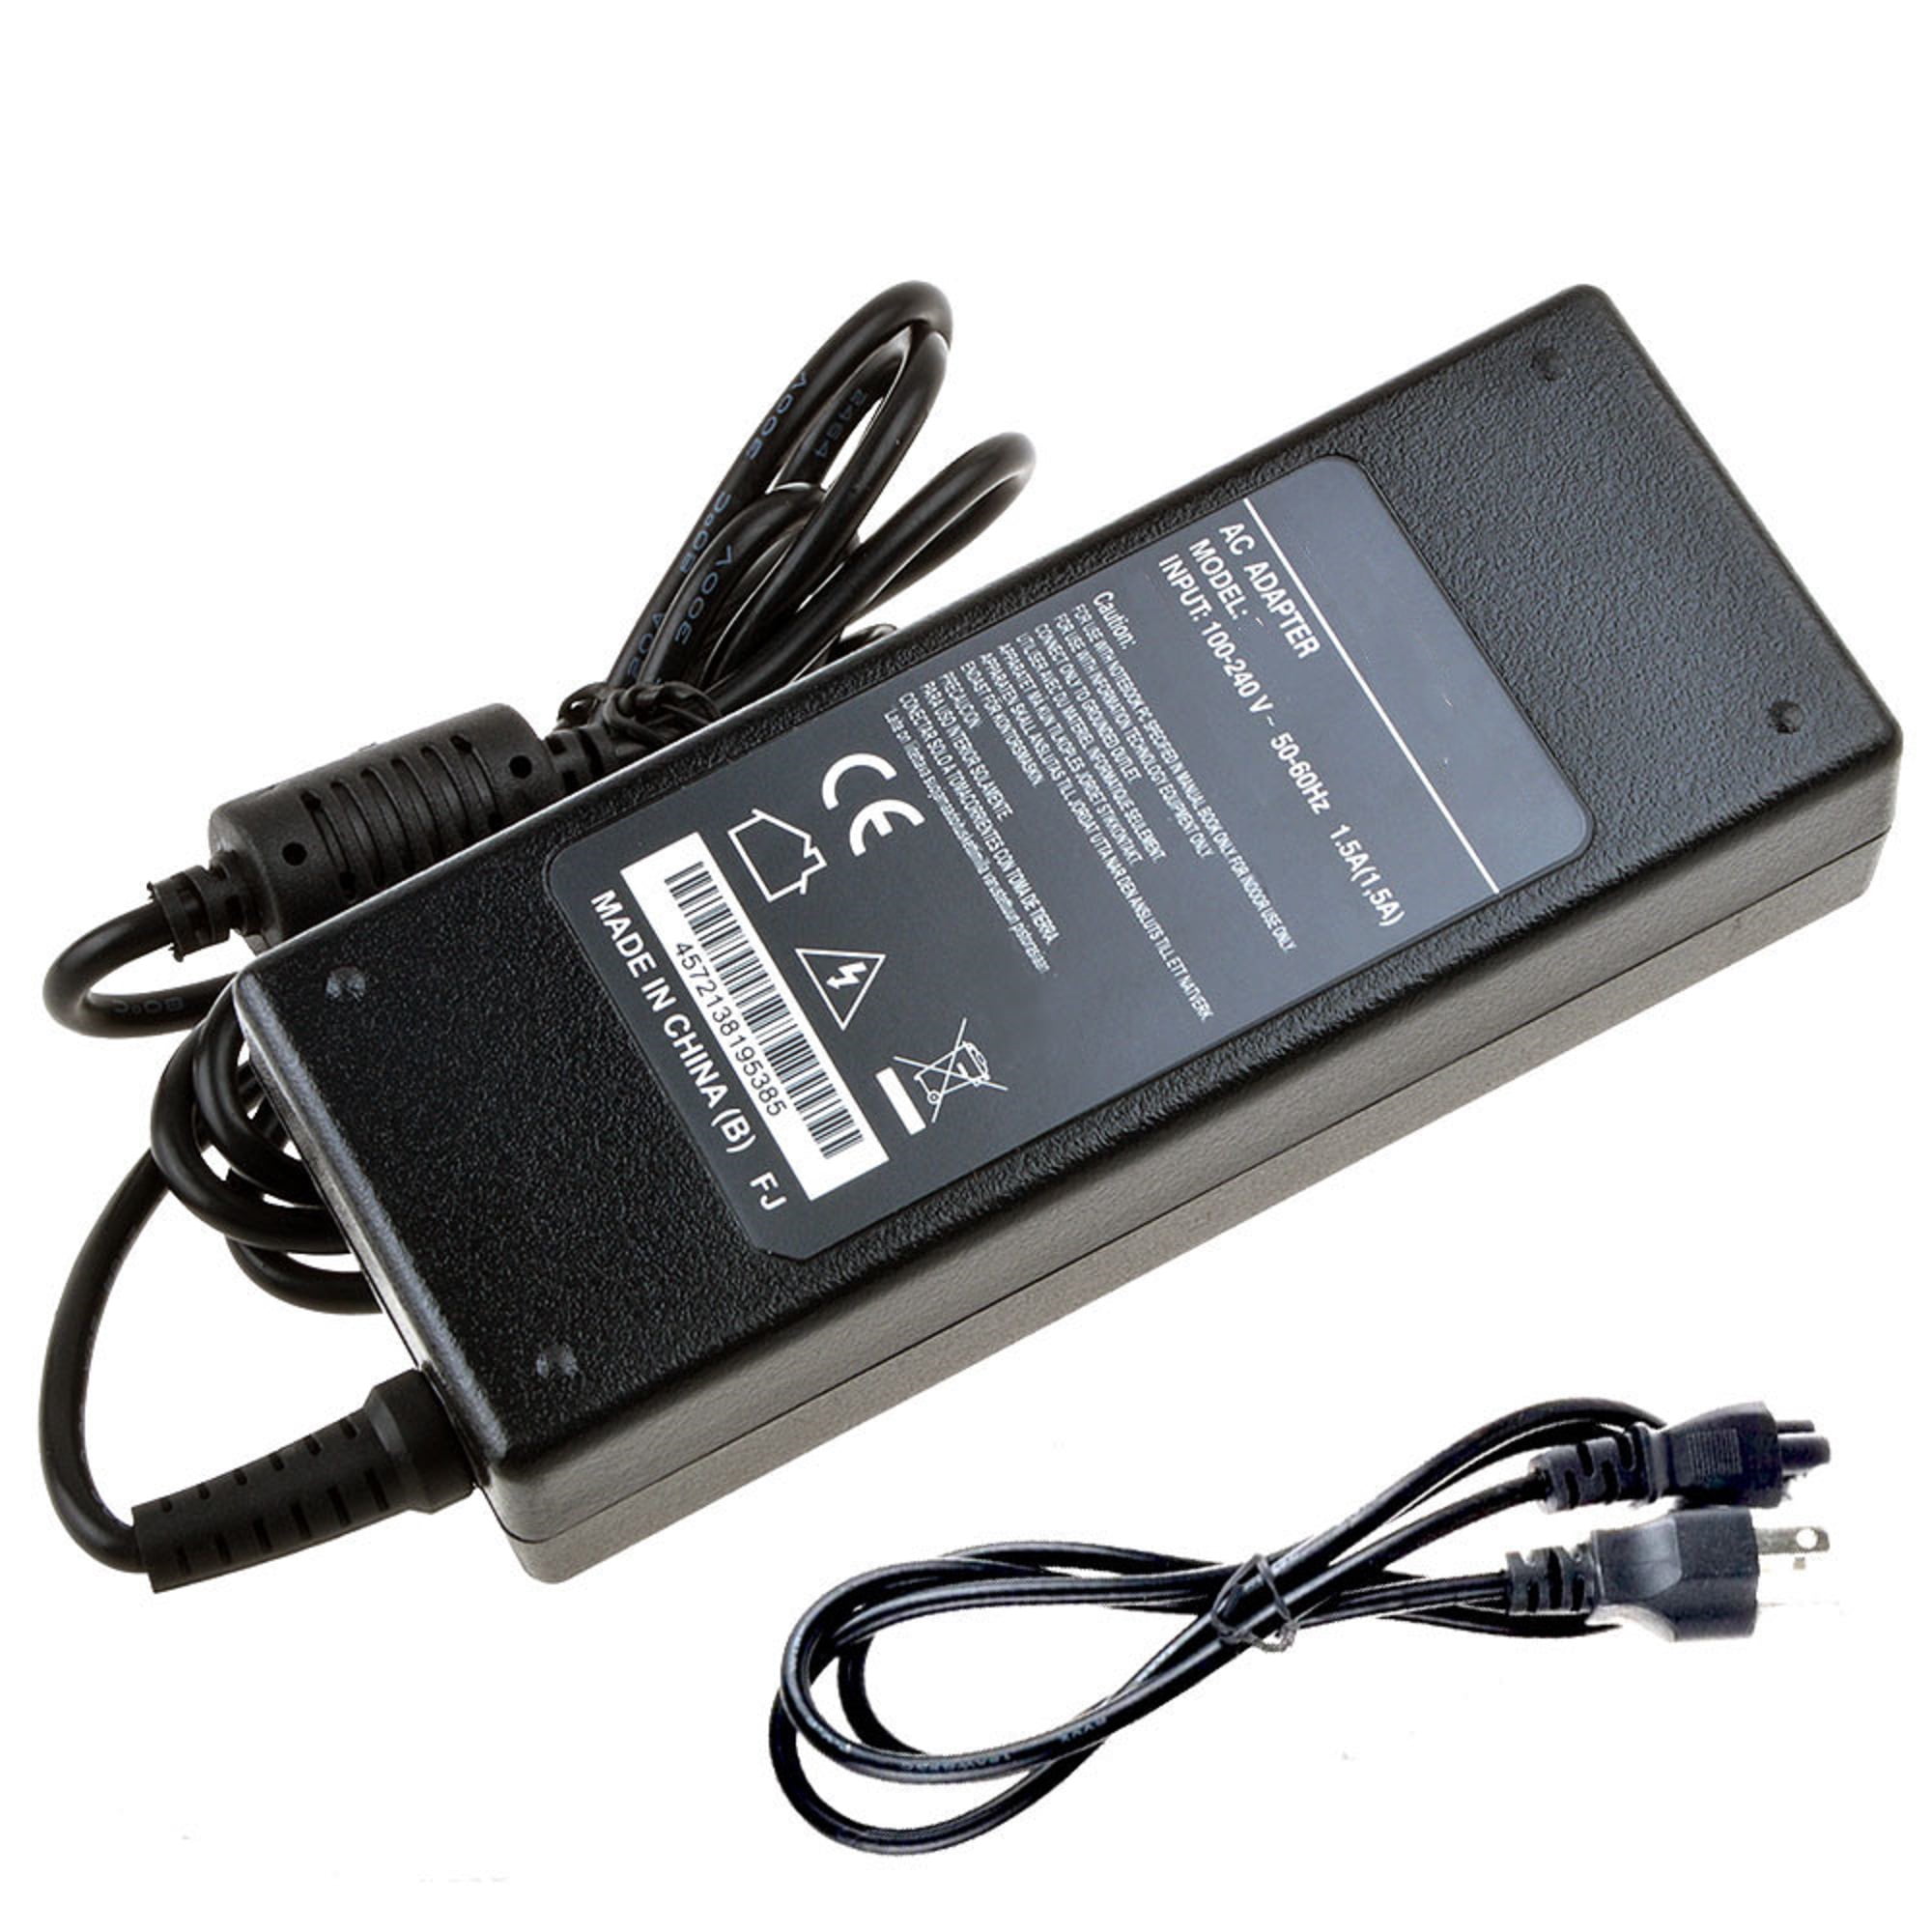 KONKIN BOO Replacement US AC/DC Adapter Battery Charger for Black Decker  GC1800 Type 2 Power Supply PSU